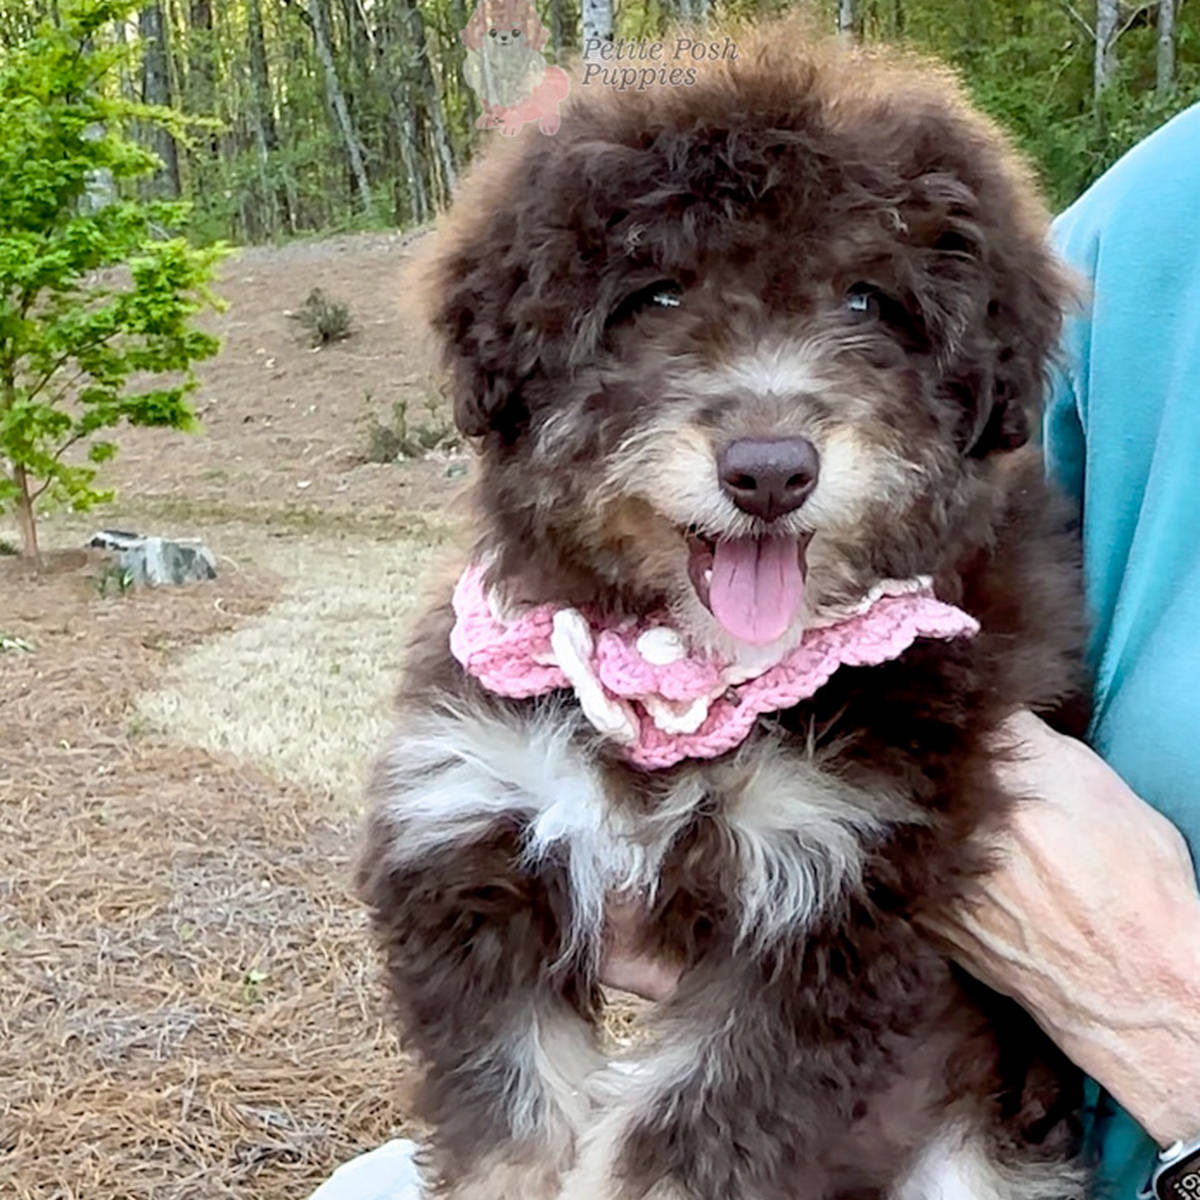 Petite-Posh-Puppies-Sandy-Female-Chocolate-Tri-colored-FB-Mini-Bernedoodle-with-green-eyes_SQ